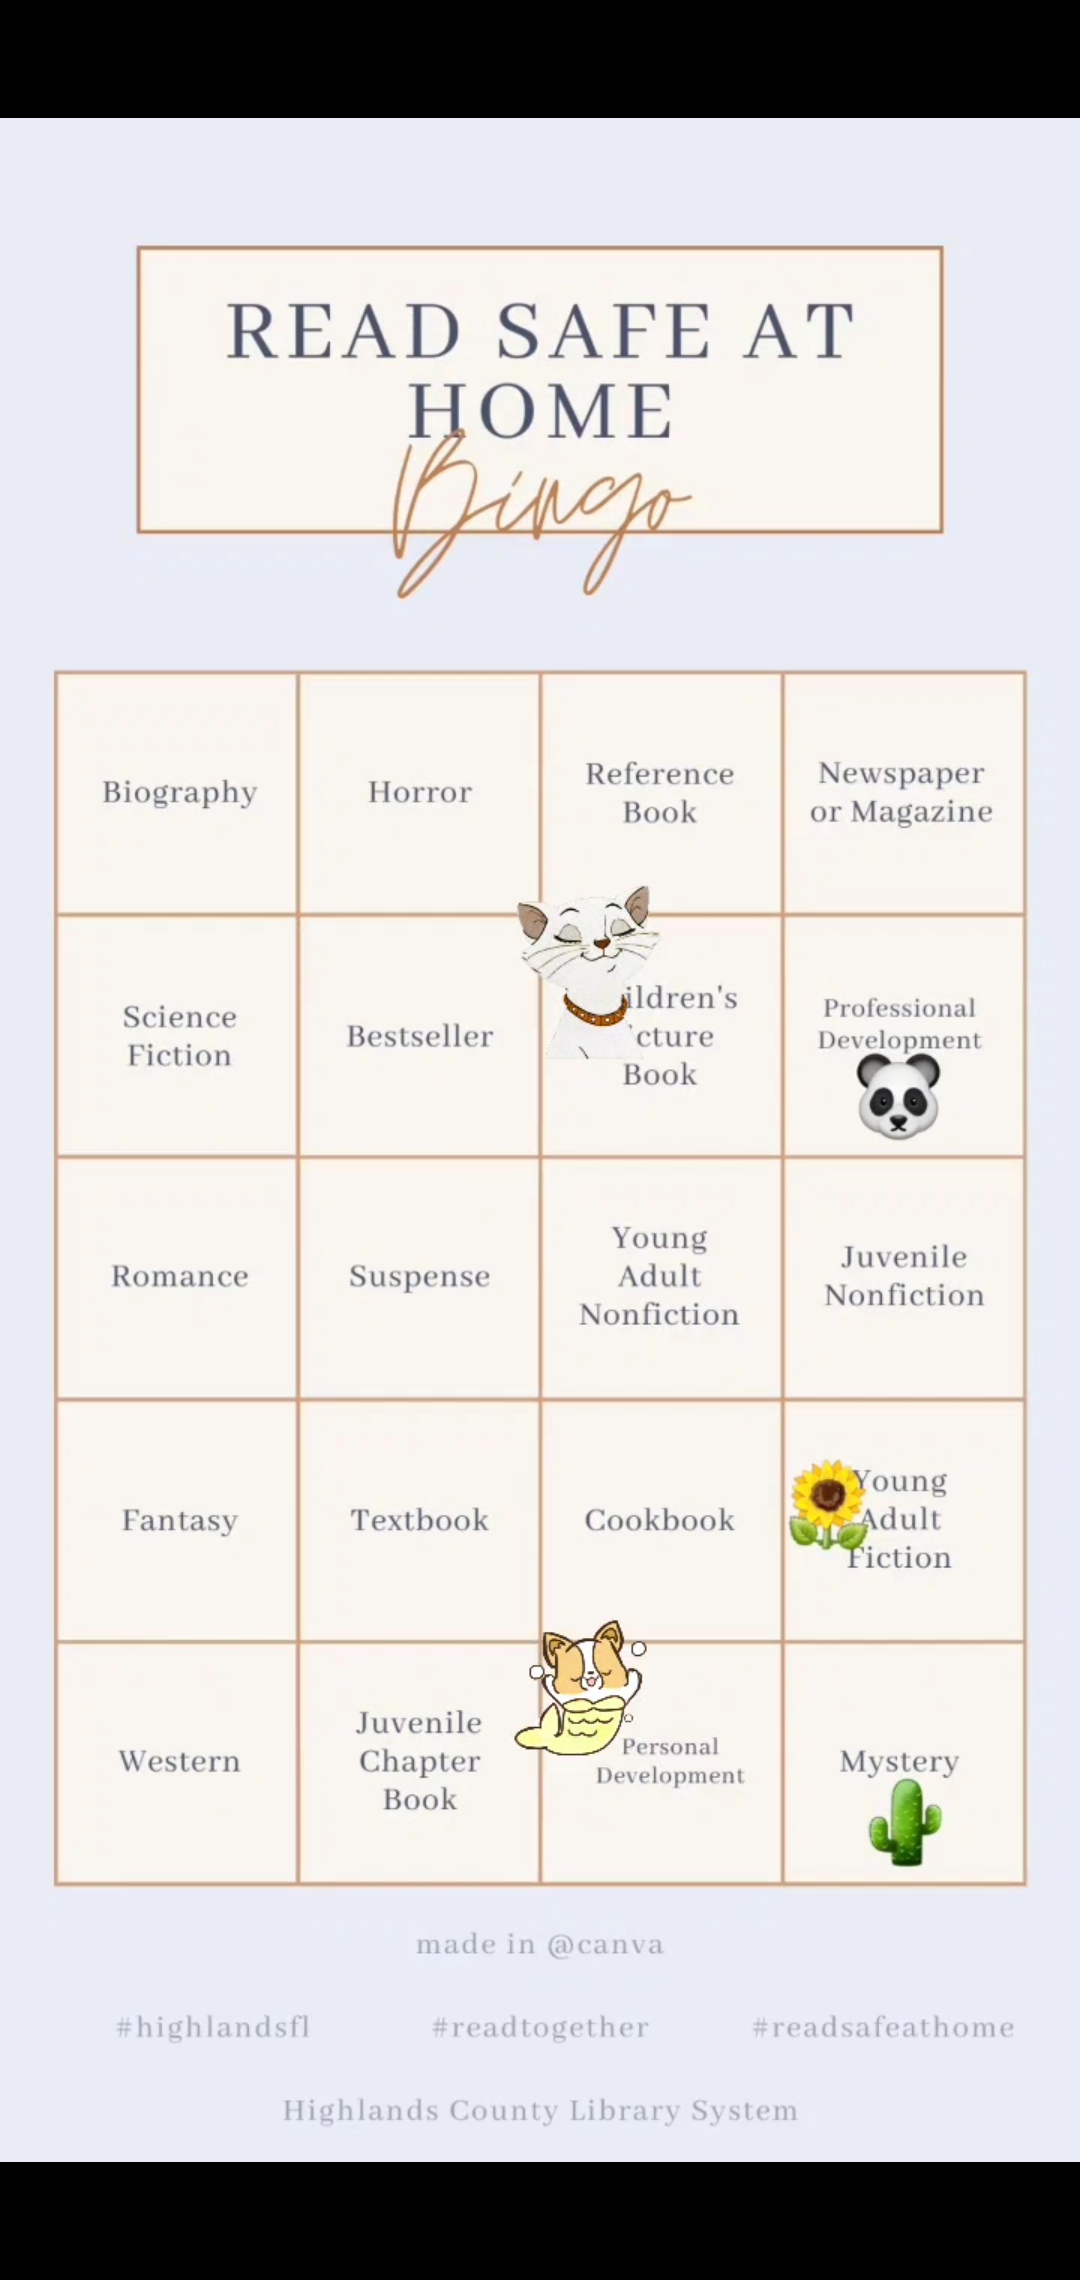 Let's play bingo! Here's a fun way to share with friends and family what you have been reading. Take a screenshot of the blank bingo card and I add your own emojis or gifs. Our Highlands Library System Manager, Vikki, has shared a bingo card with what she has been reading in her free time. Share & have fun! Tag your bingo cards as #highlandsfl #readhighlandsfl #librarybingo